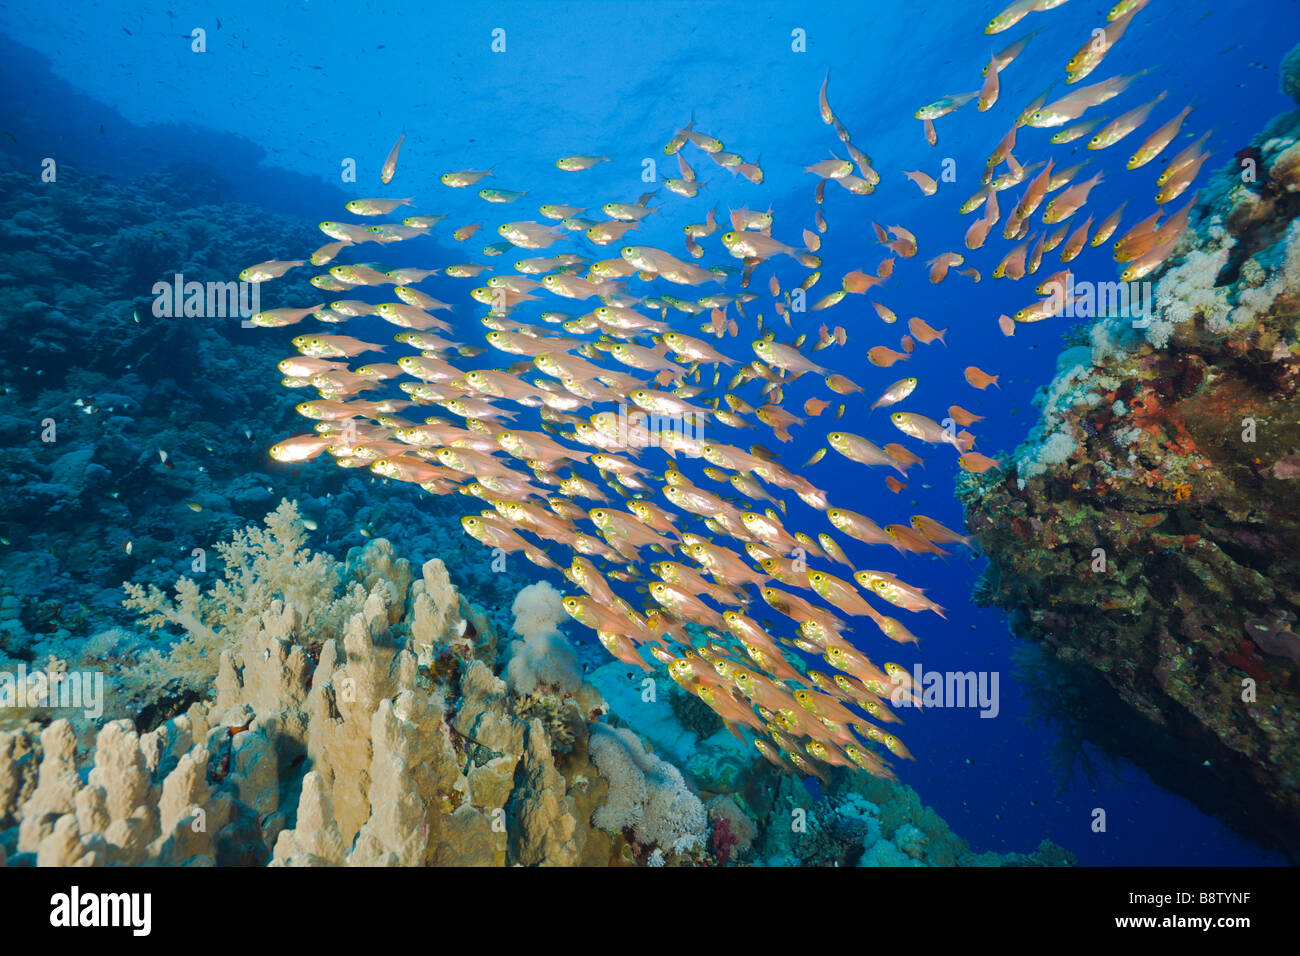 Schooling Sweeper Parapriacanthus Daedalus Reef Red Sea Egypt Stock Photo